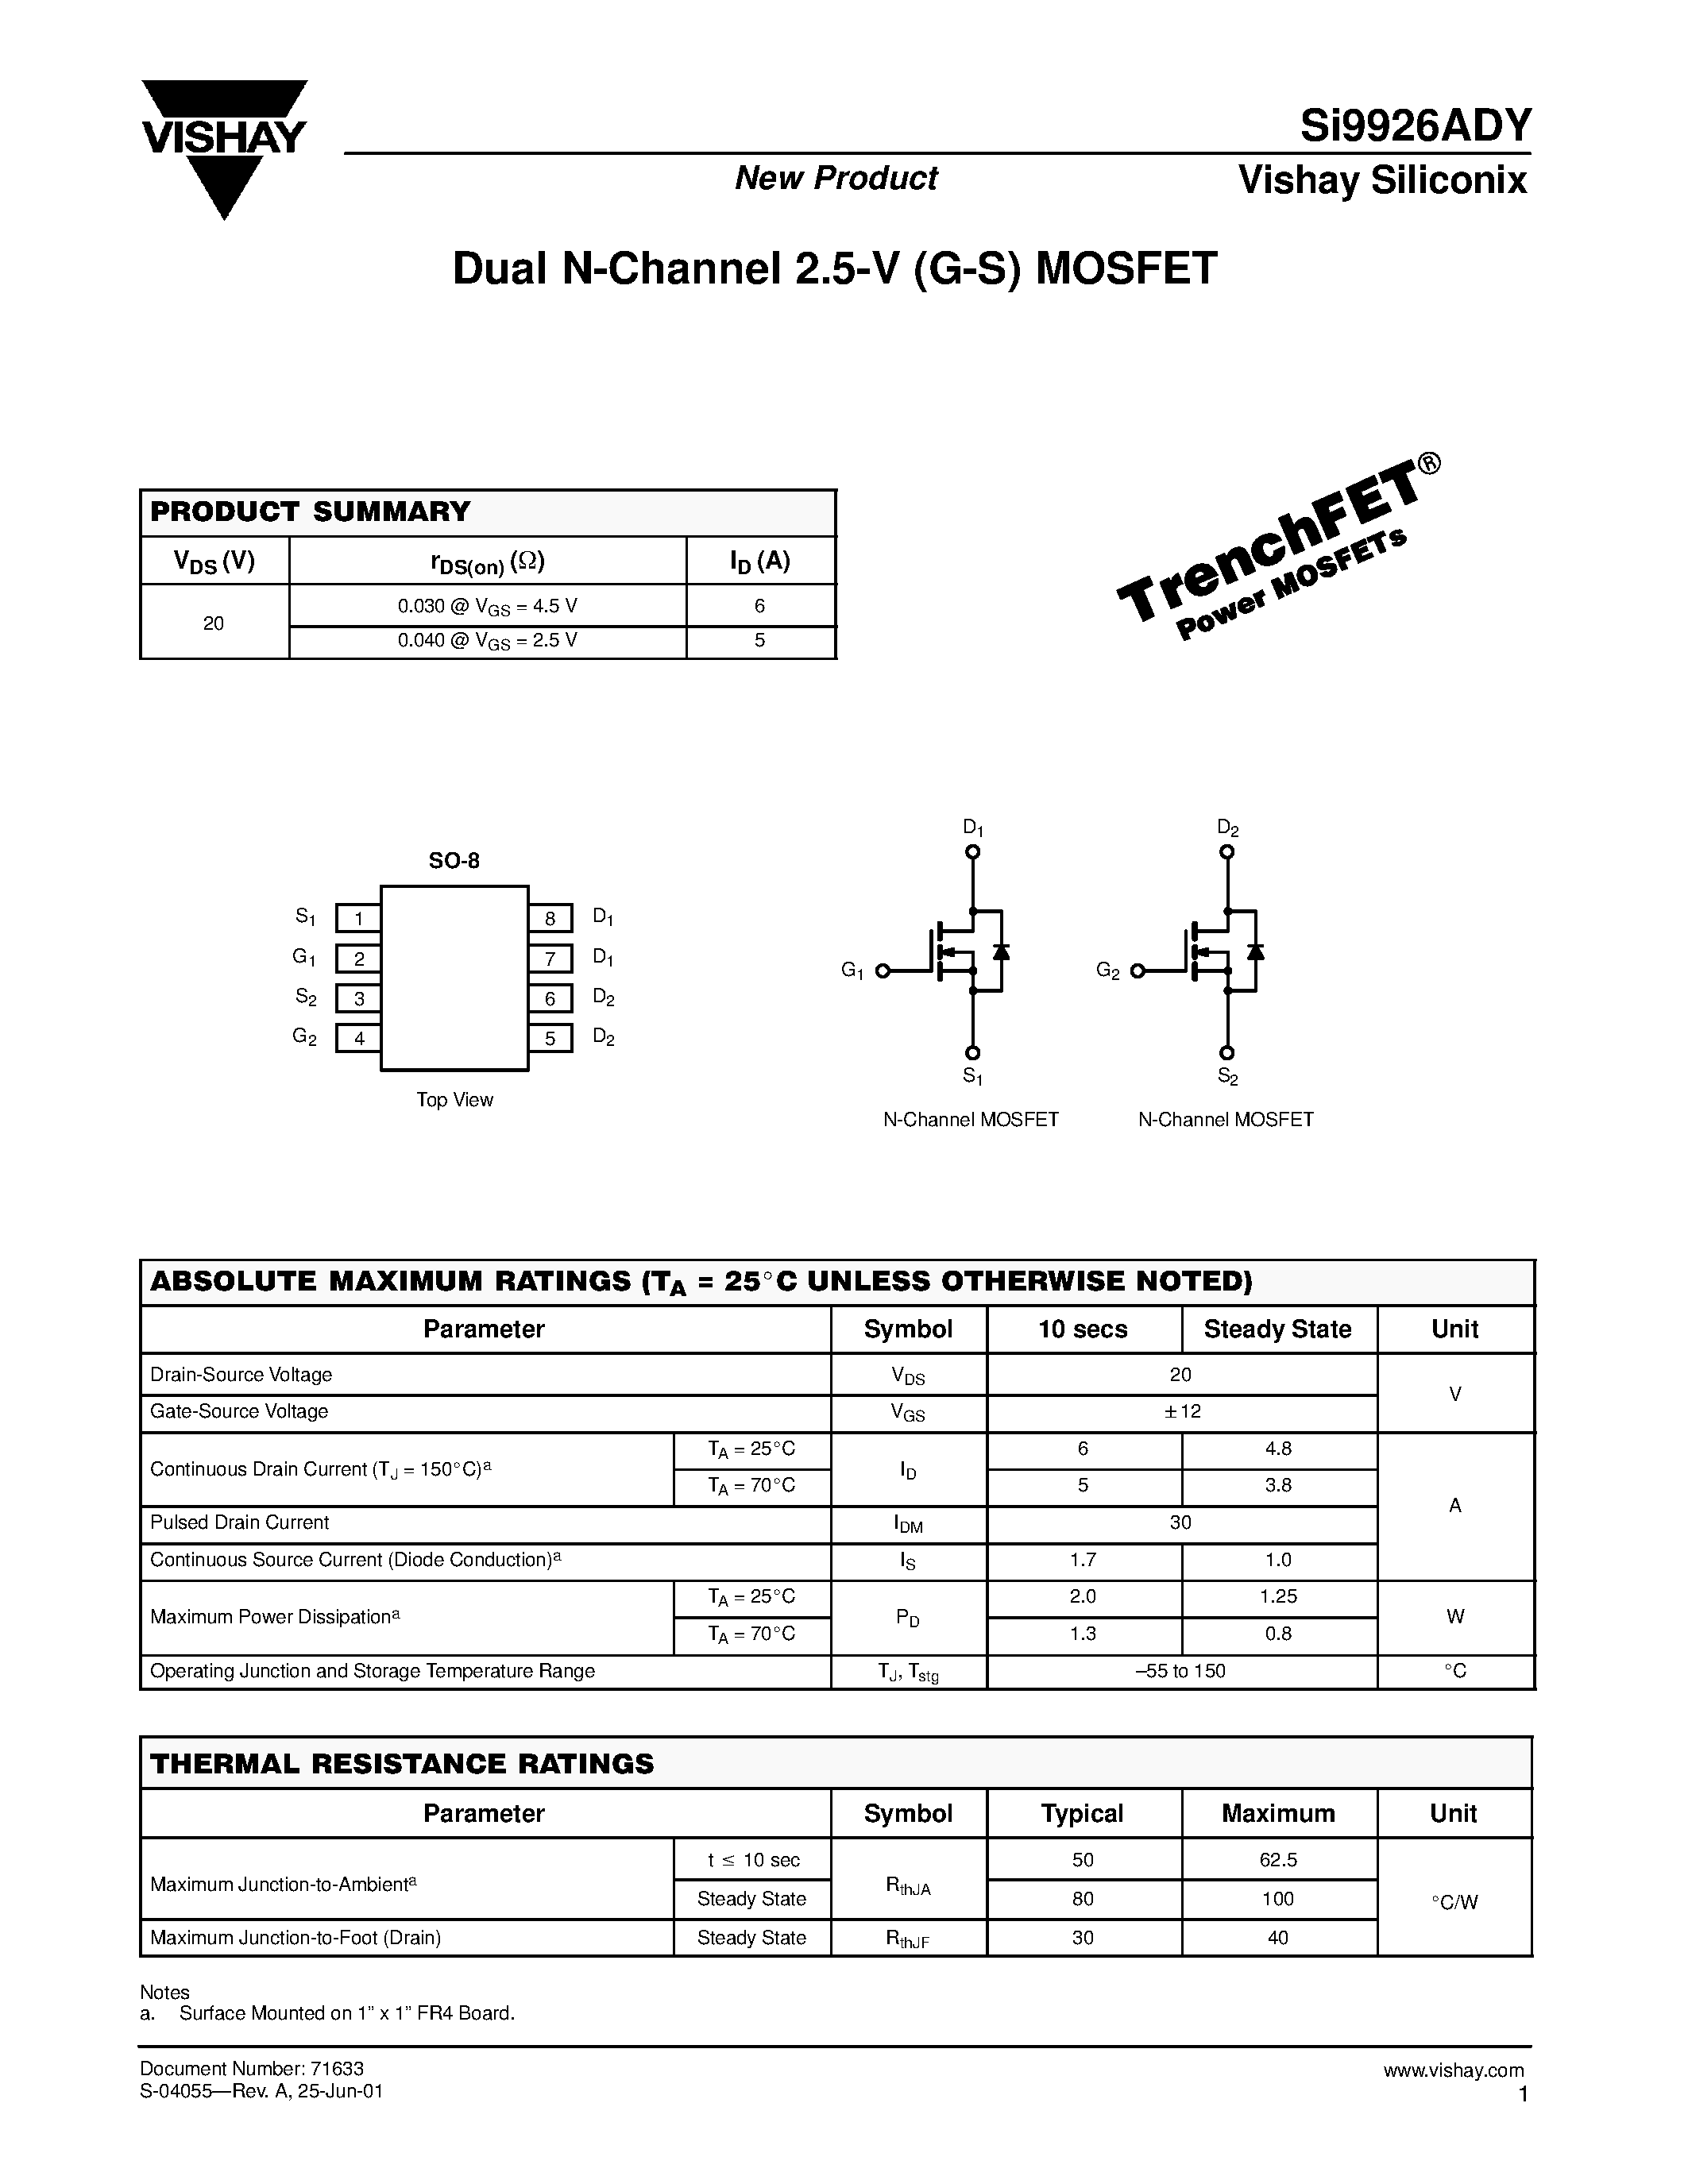 Даташит SI9926ADY - Dual N-Channel 2.5-V (G-S) MOSFET страница 1